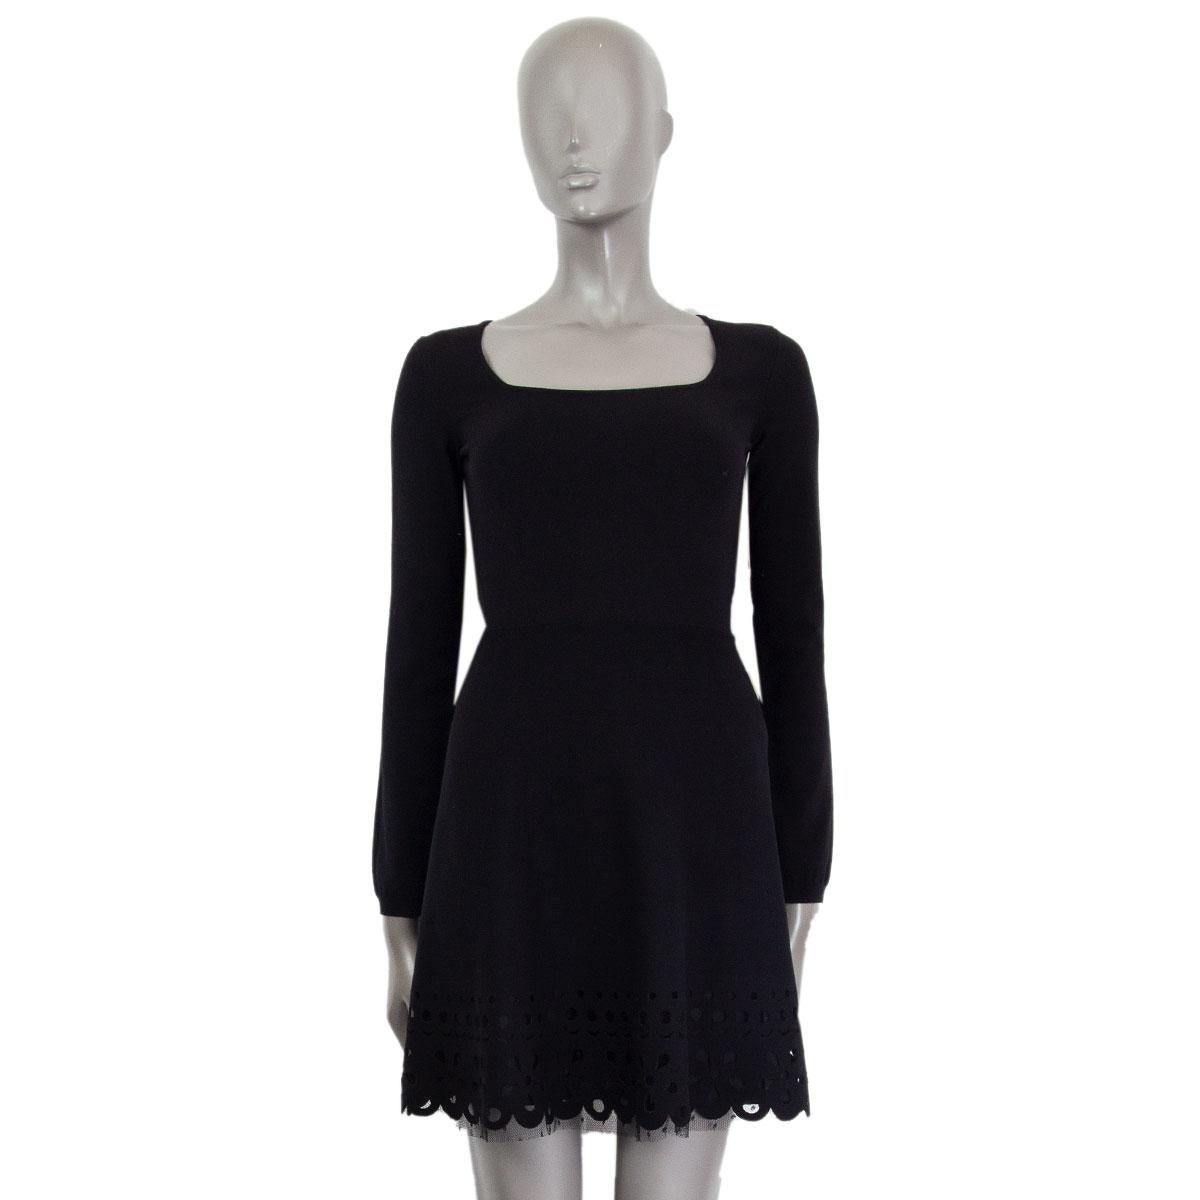 R.E.D. By Valentino long sleeve a-line knit dress in black viscose (70%) and polyester (30%) with a square neckline and a cut-out hem with mesh detail. Closes partially on the side. Lined in cotton (100%). New.

Tag Size XS 
Size XS
Shoulder Width